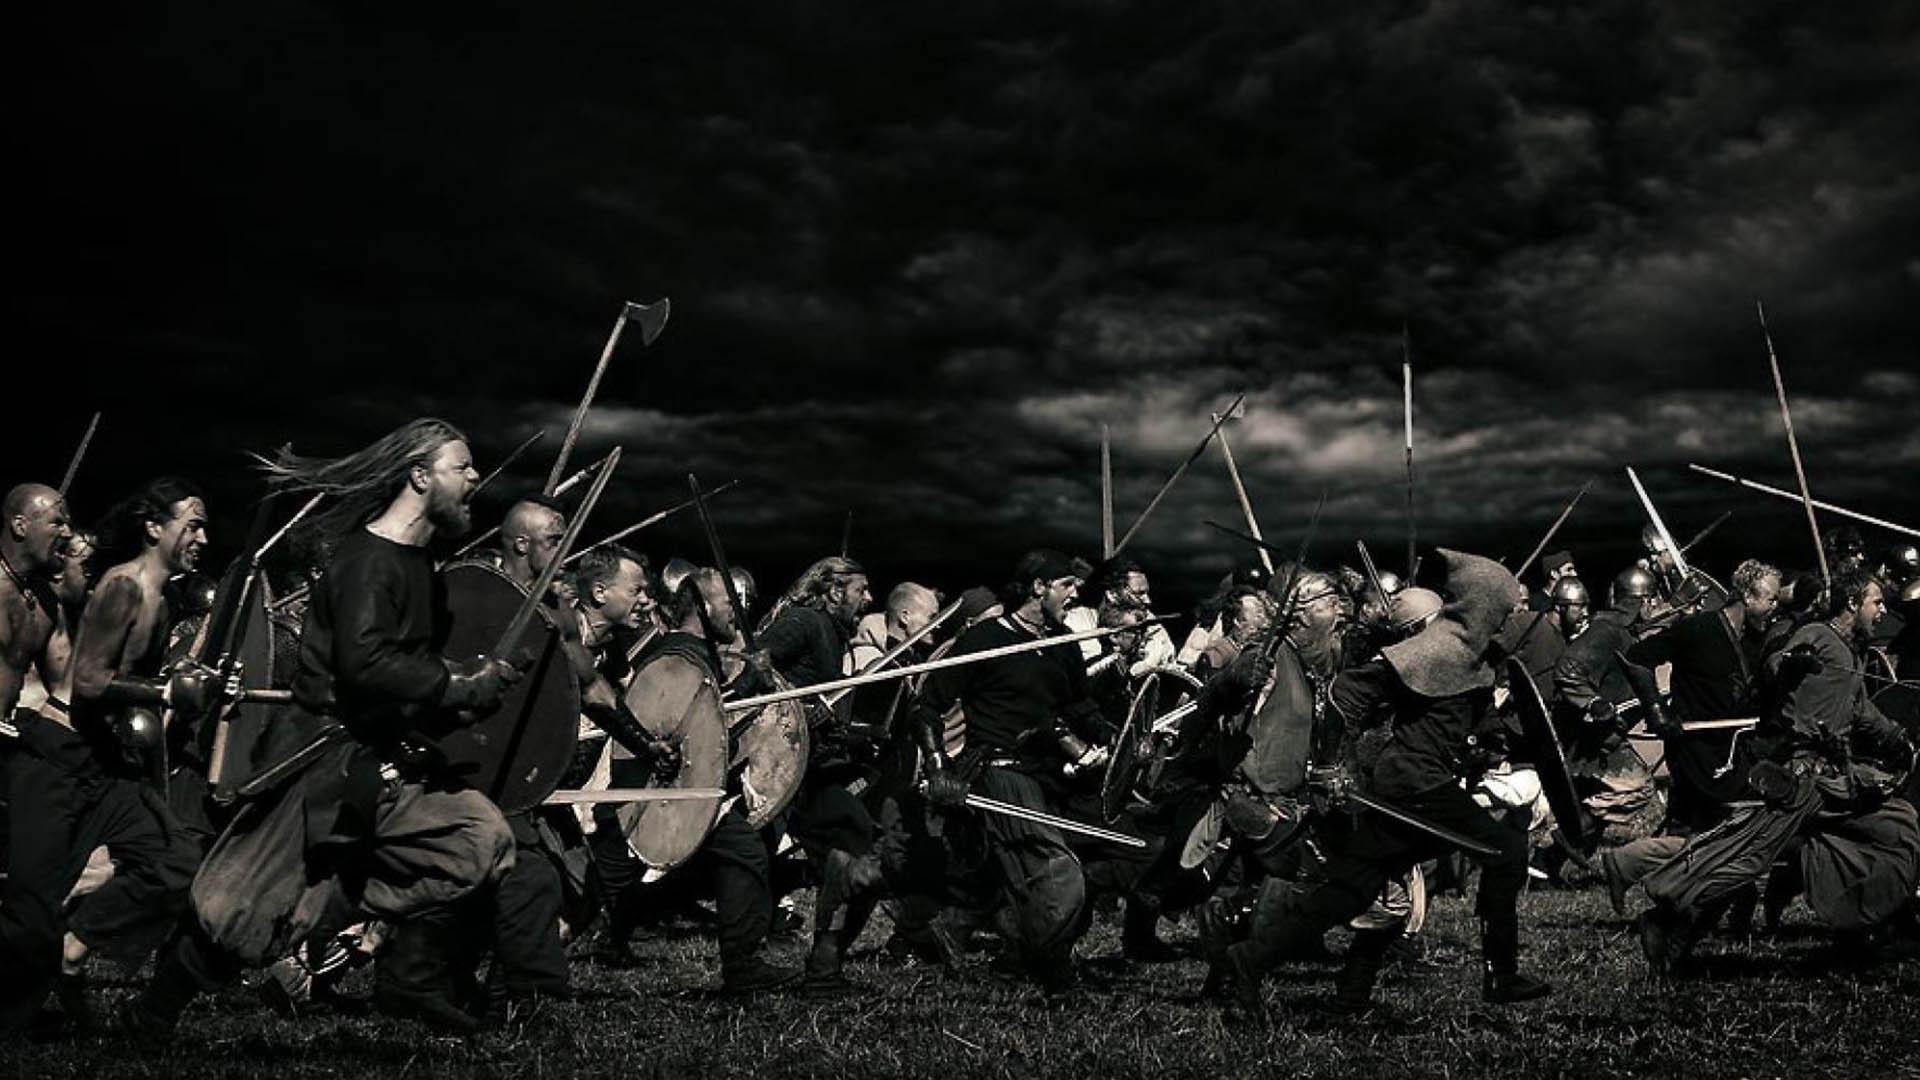 An edited image of a battle in the Vikings series